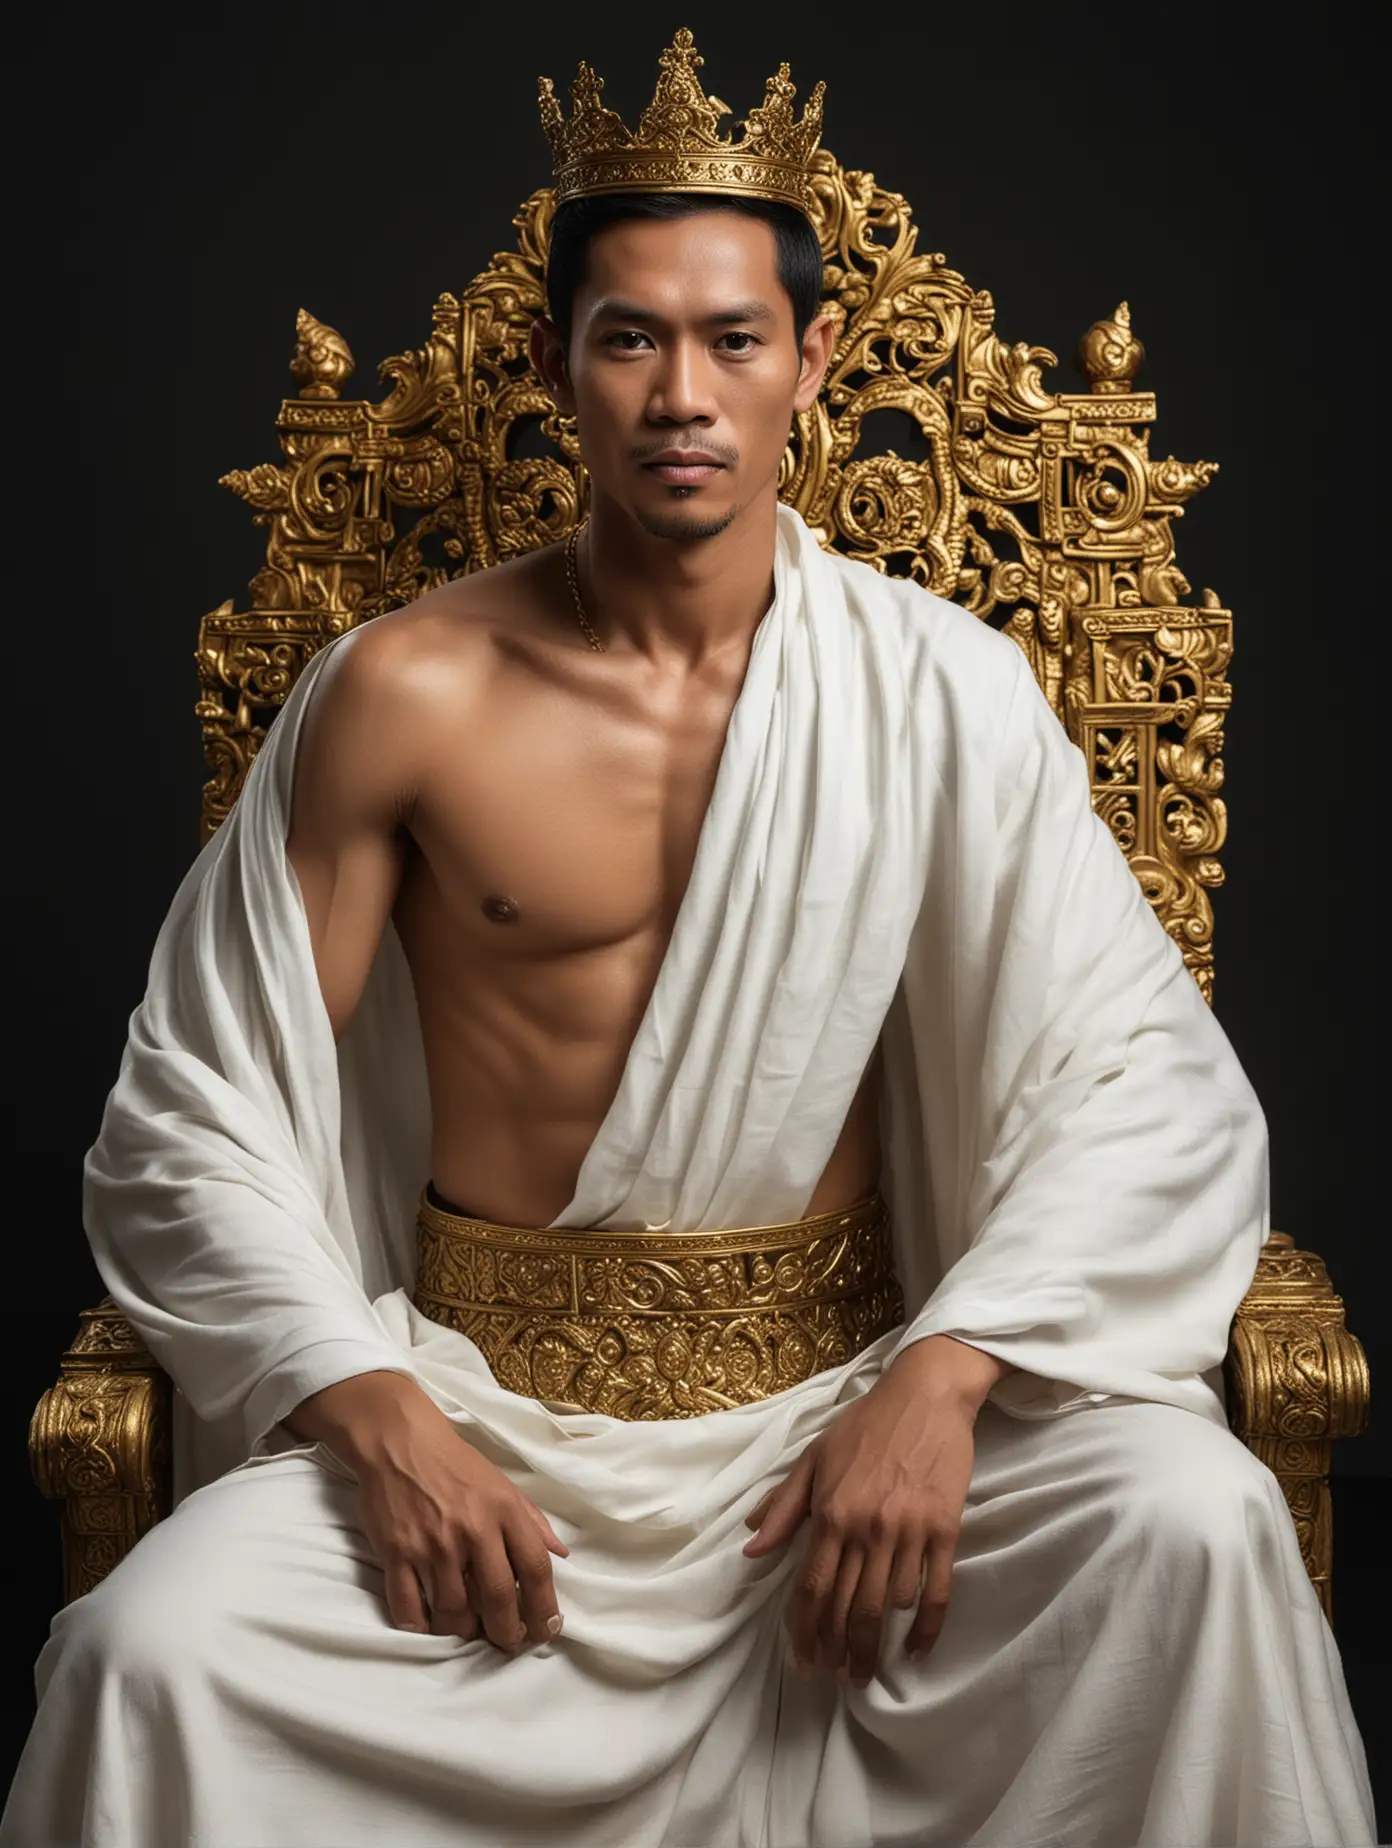 Handsome-Shirtless-Indonesian-Male-King-Sitting-on-Gold-Throne